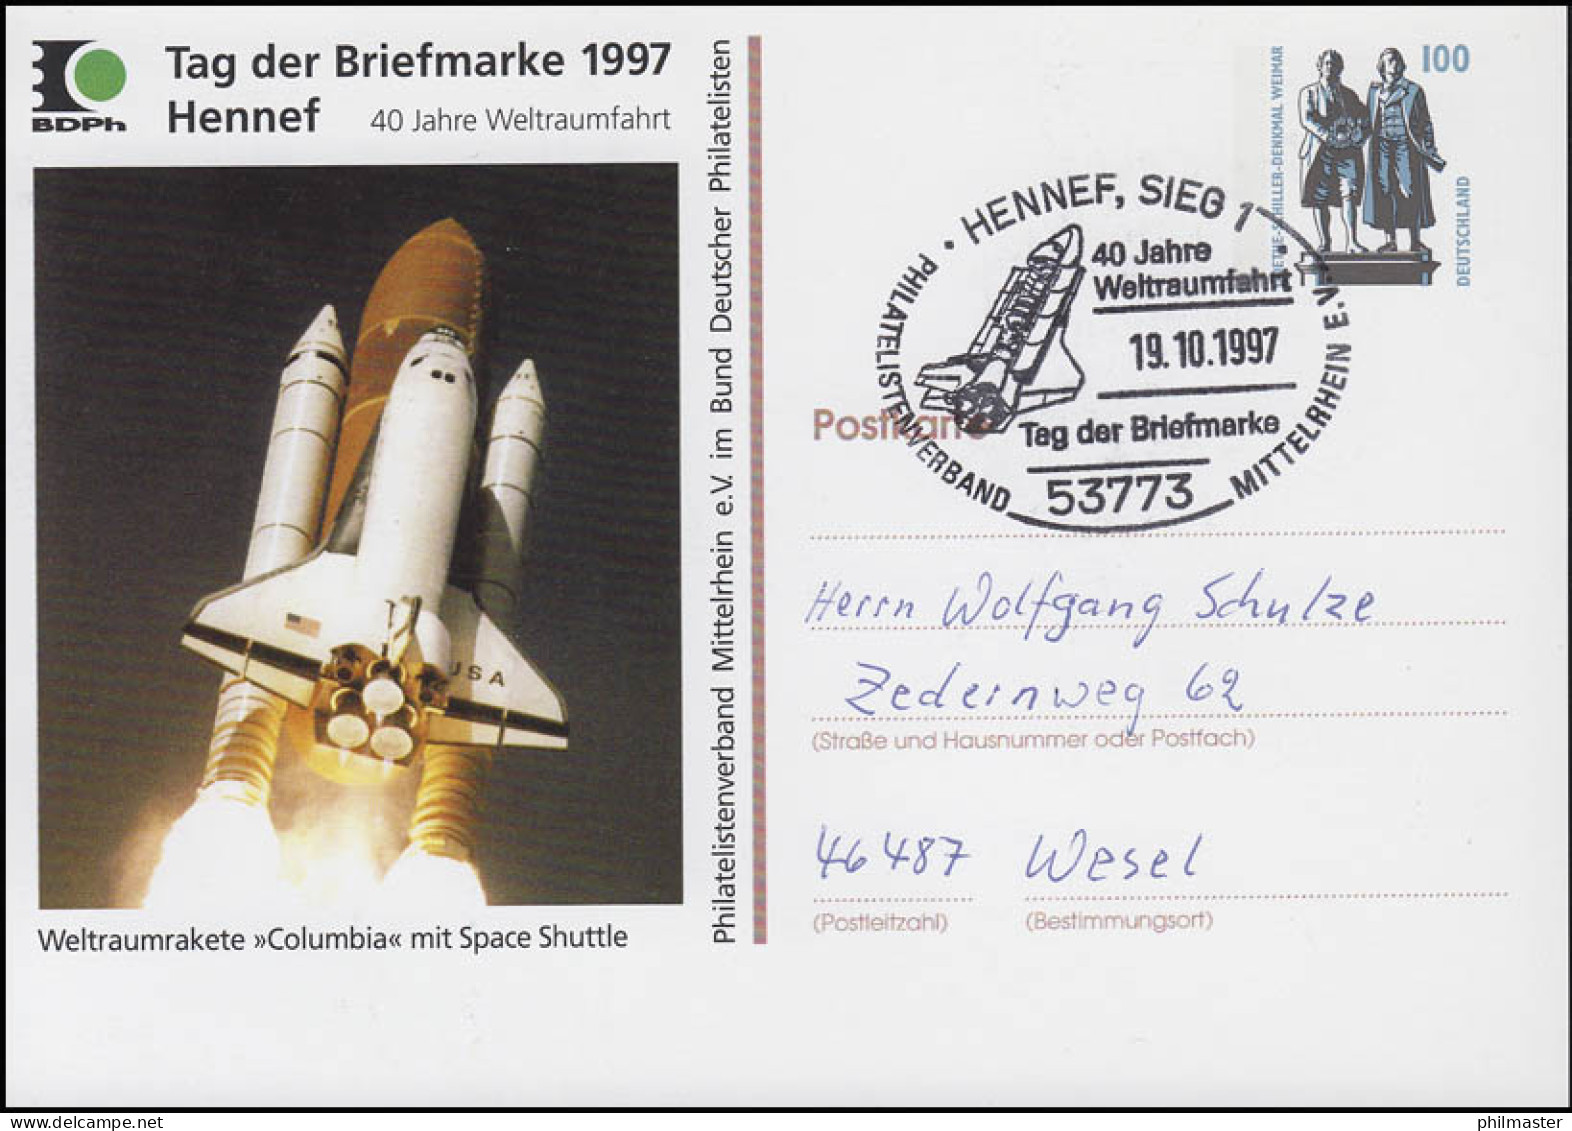 Privat-Postkarte Space Shuttle Columbia, SSt Hennef Weltraumfahrt 19.10.97 - Private Covers - Mint